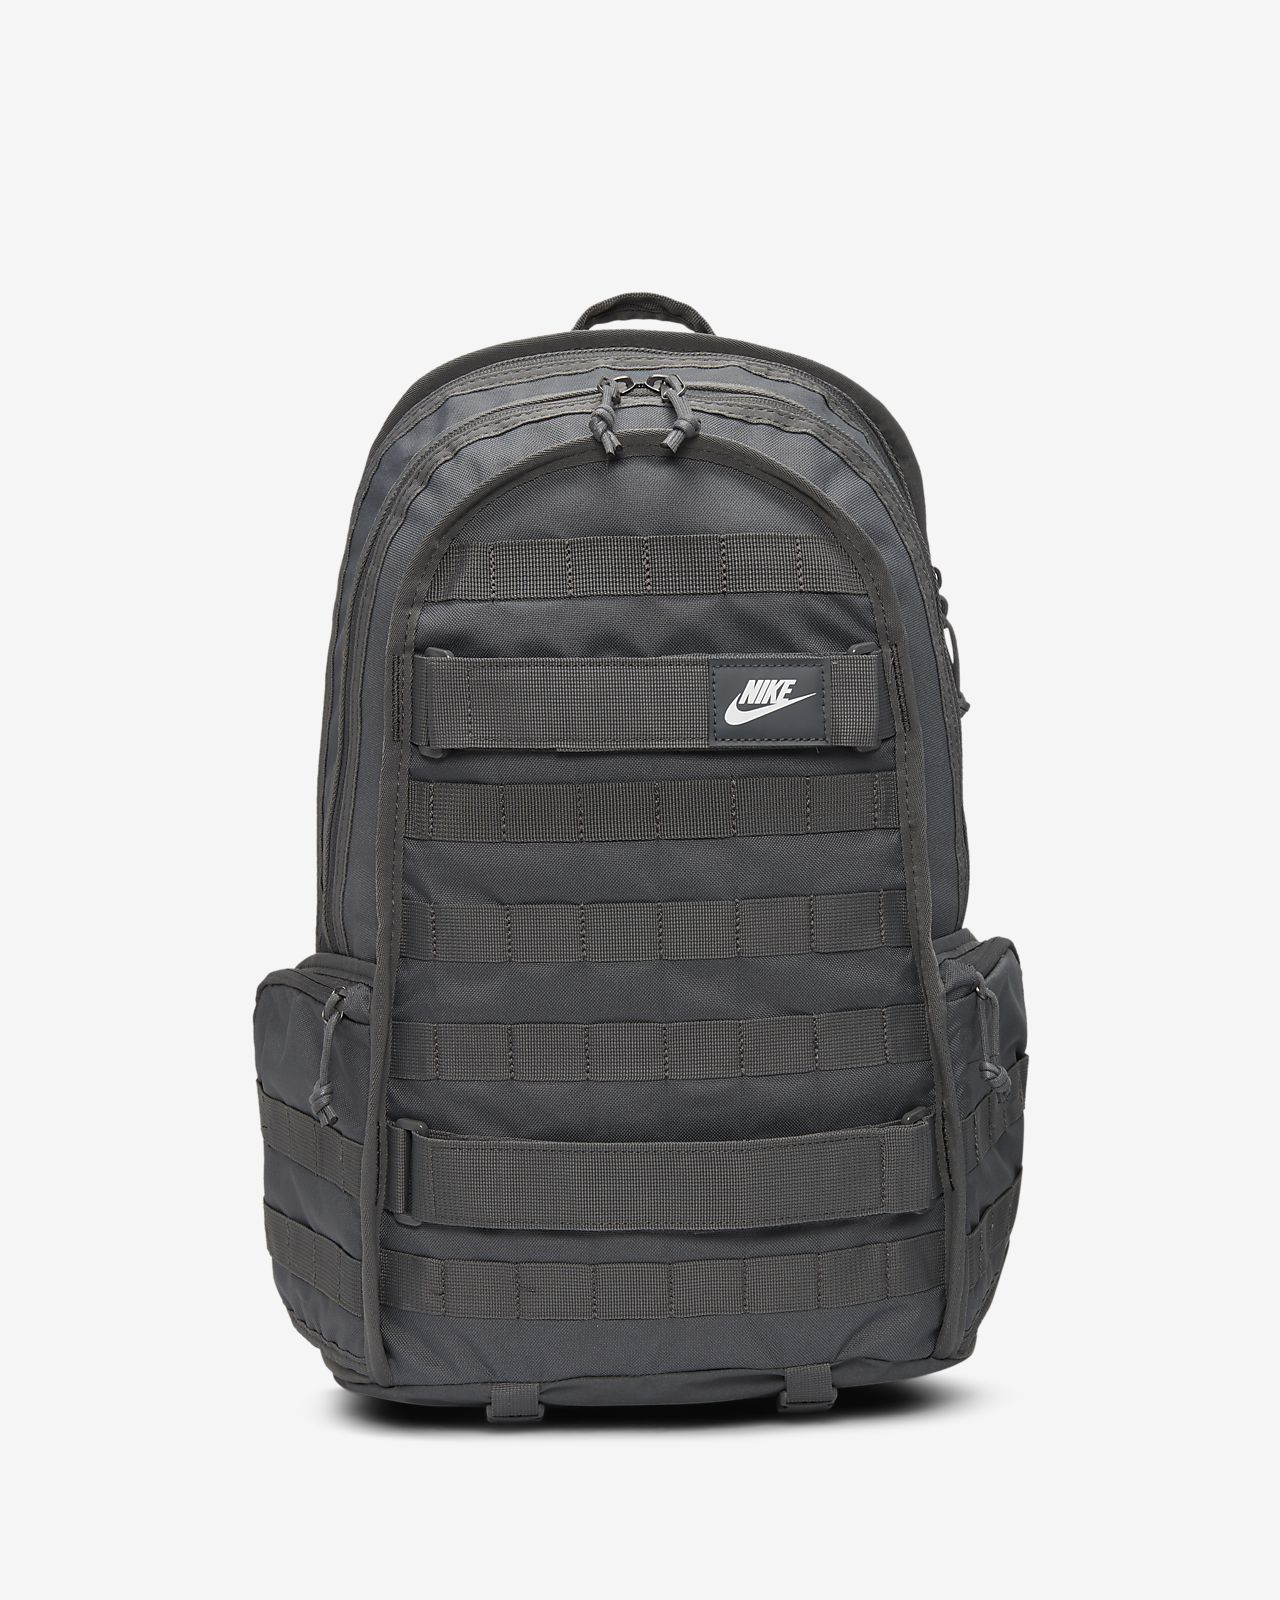 rpm backpack